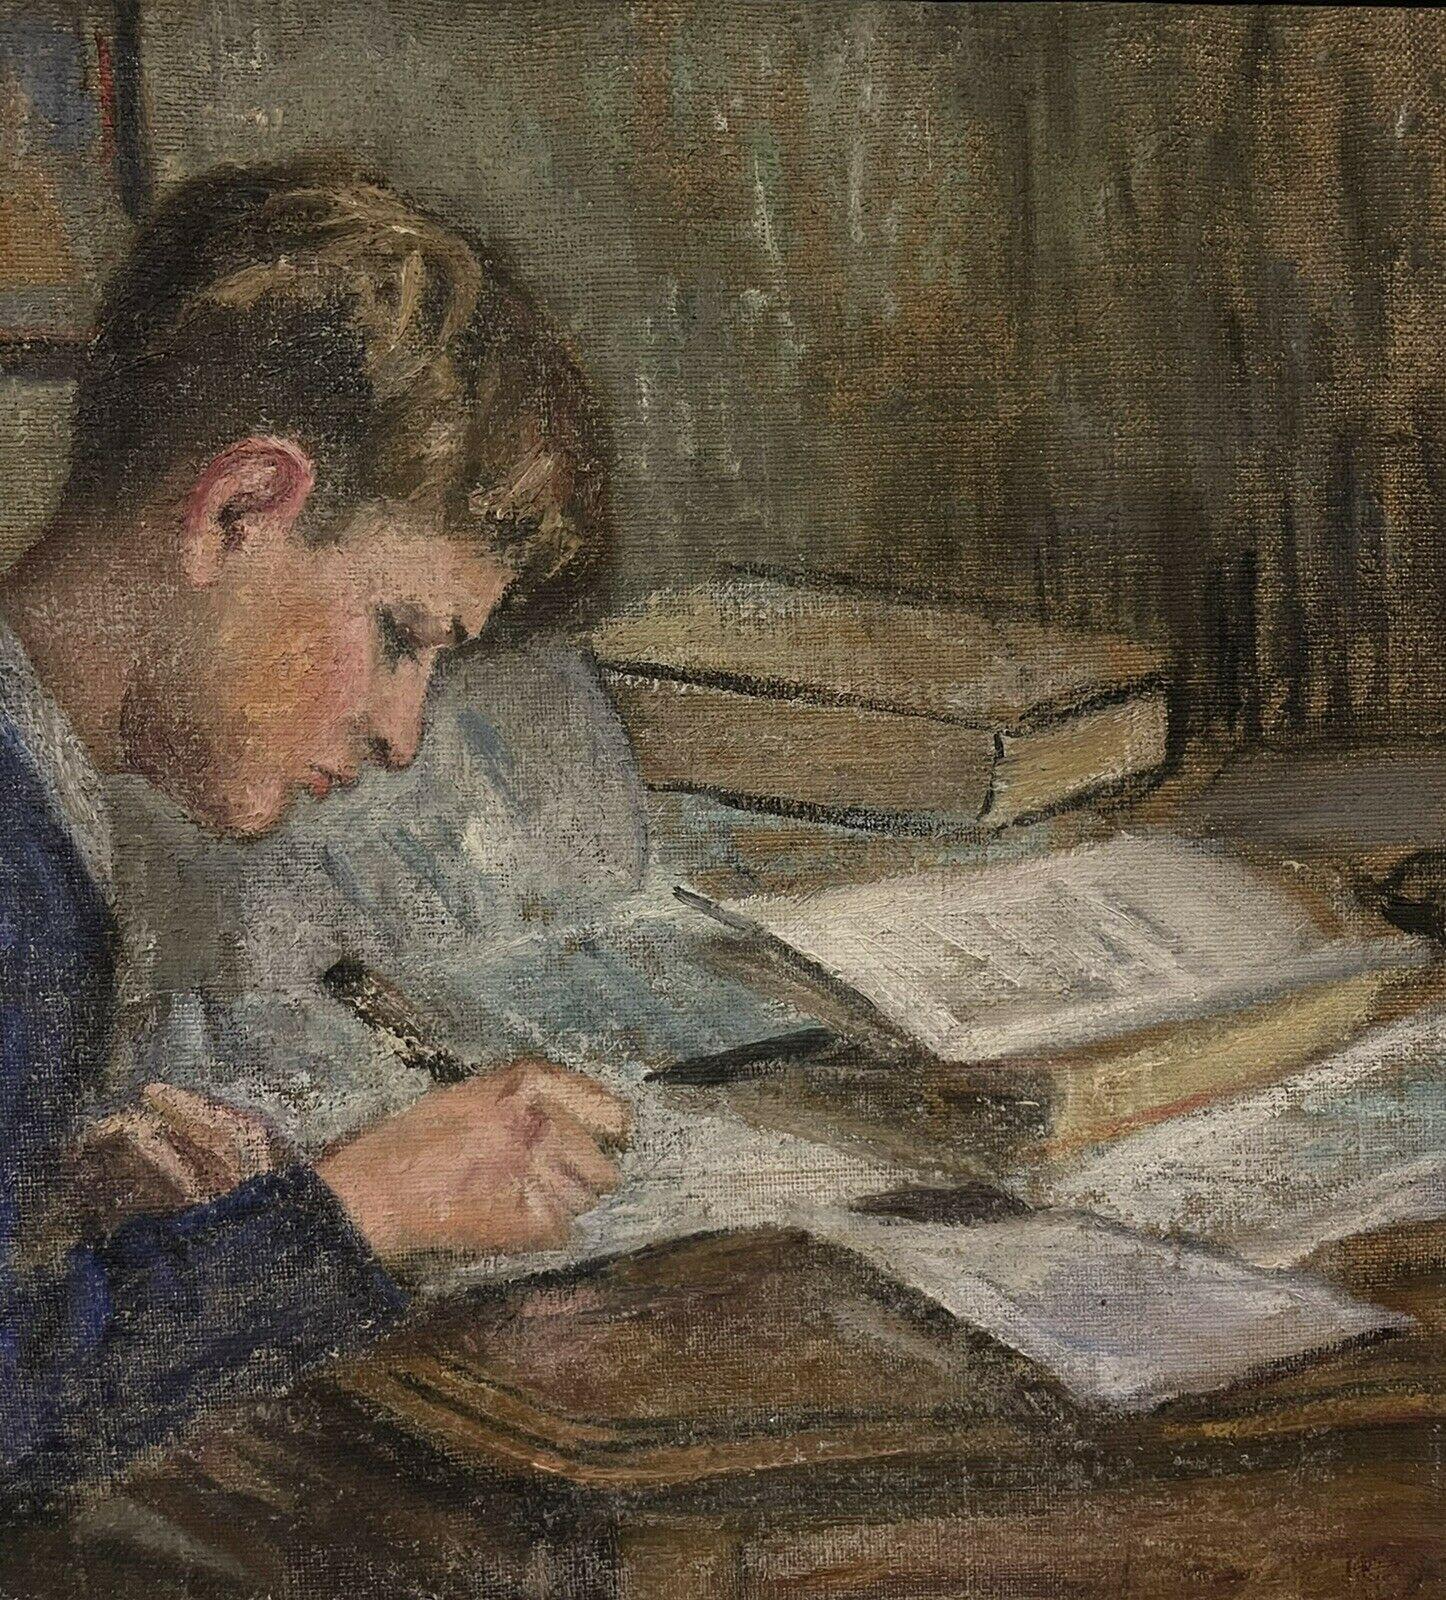 Artist/ School: French School, signed and dated 1940. 

Title: The Pupil at his desk

Medium: signed oil painting on canvas, framed.

Size:

framed:  20.5 x 25.25 inches
canvas:   18 x 22 inches  

Provenance: private collection, France

Condition: